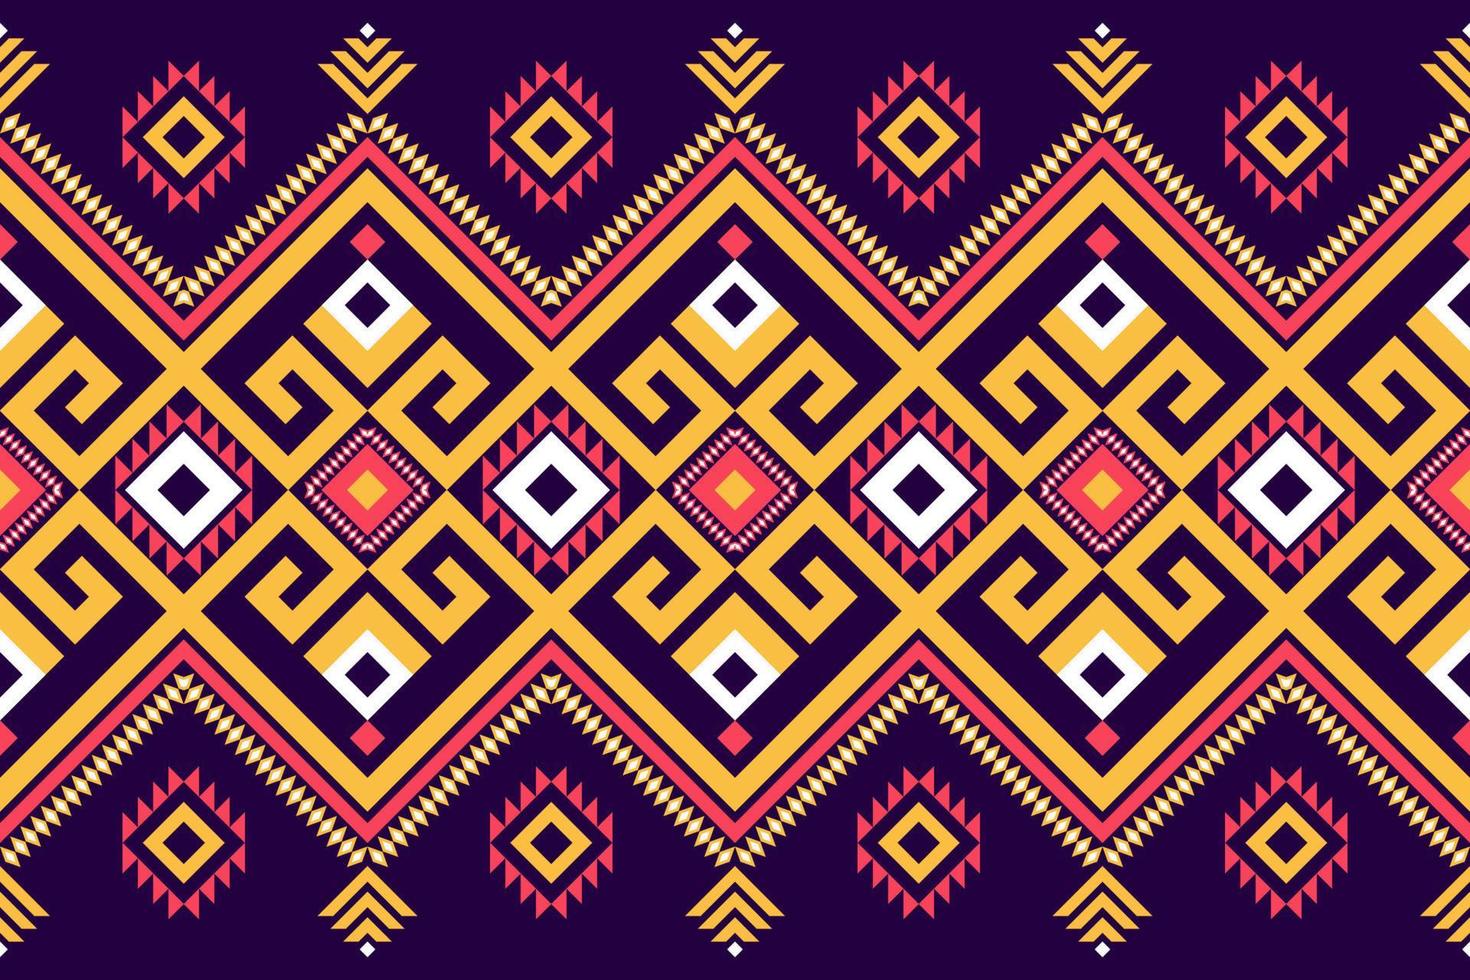 Geometric ethnic seamless pattern. Traditional tribal style. Aztec handcraft. Design for background,illustration,texture,fabric,batik,clothing,wrapping,wallpaper,carpet,embroidery vector